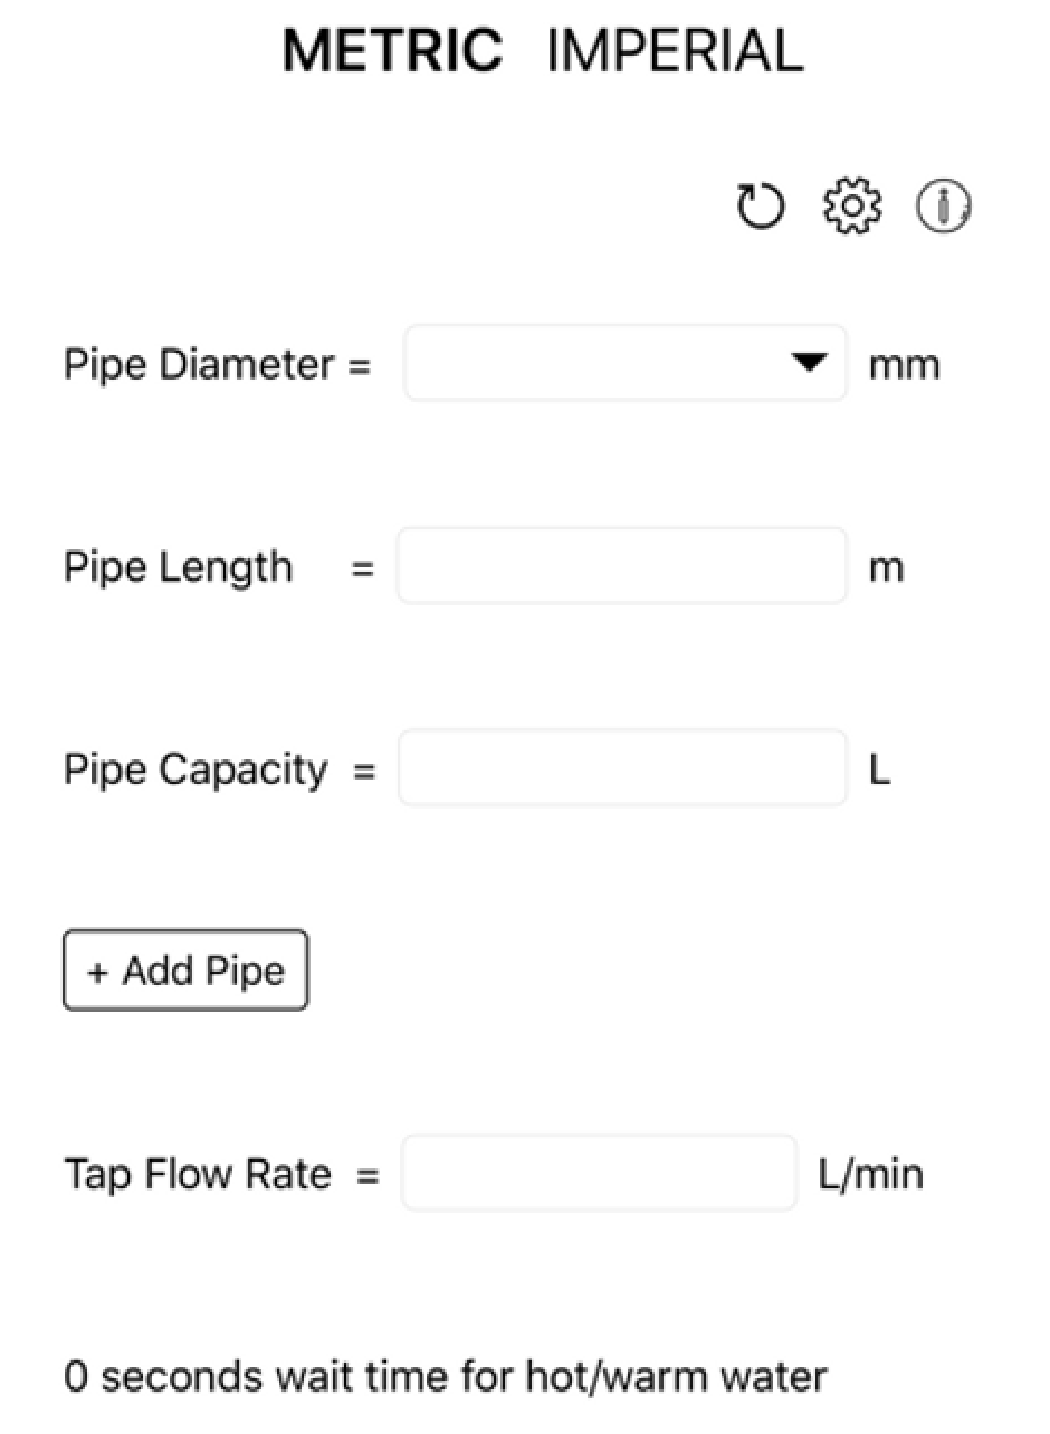 Dead Leg Pipe Volume Calculator free to use h2x engineering